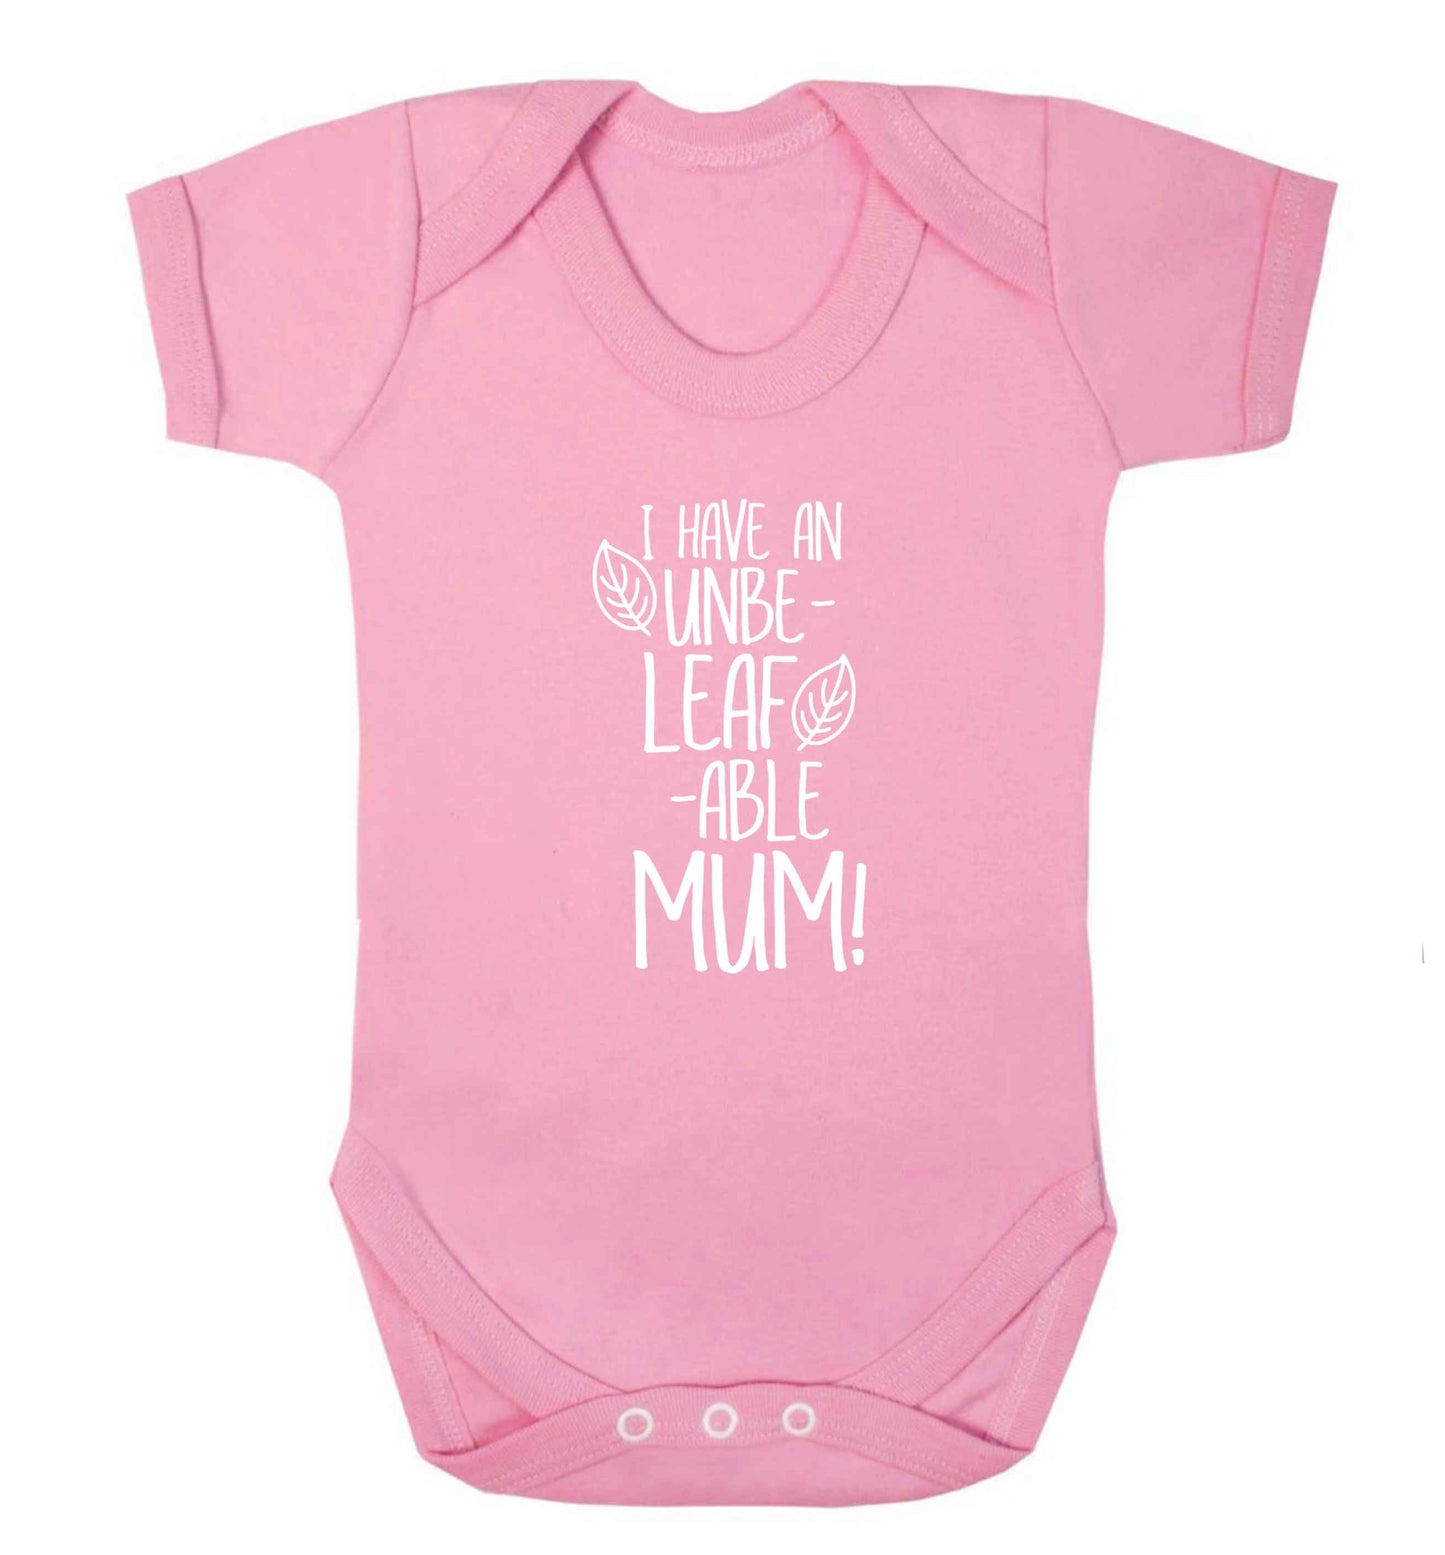 I have an unbeleafable mum! baby vest pale pink 18-24 months